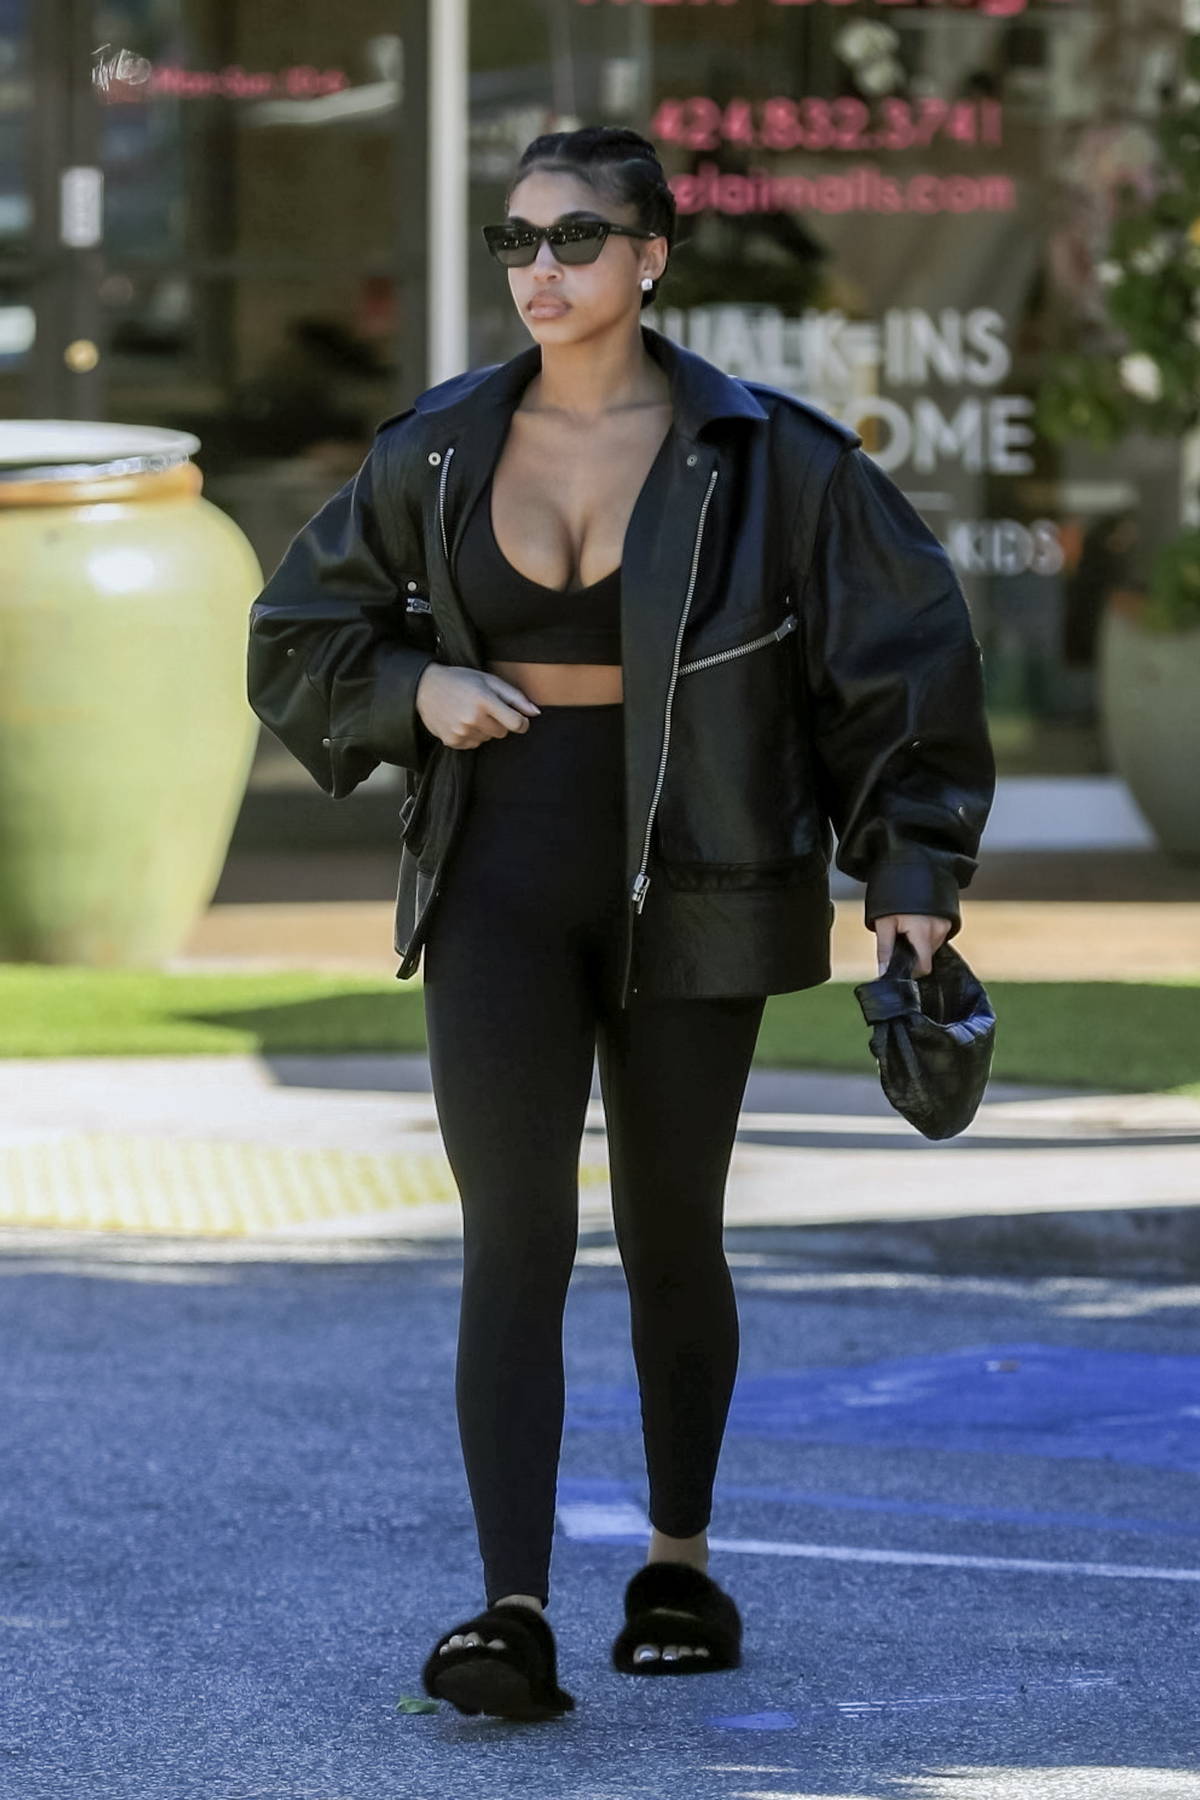 Lori Harvey sports black sports bra and leggings with a leather